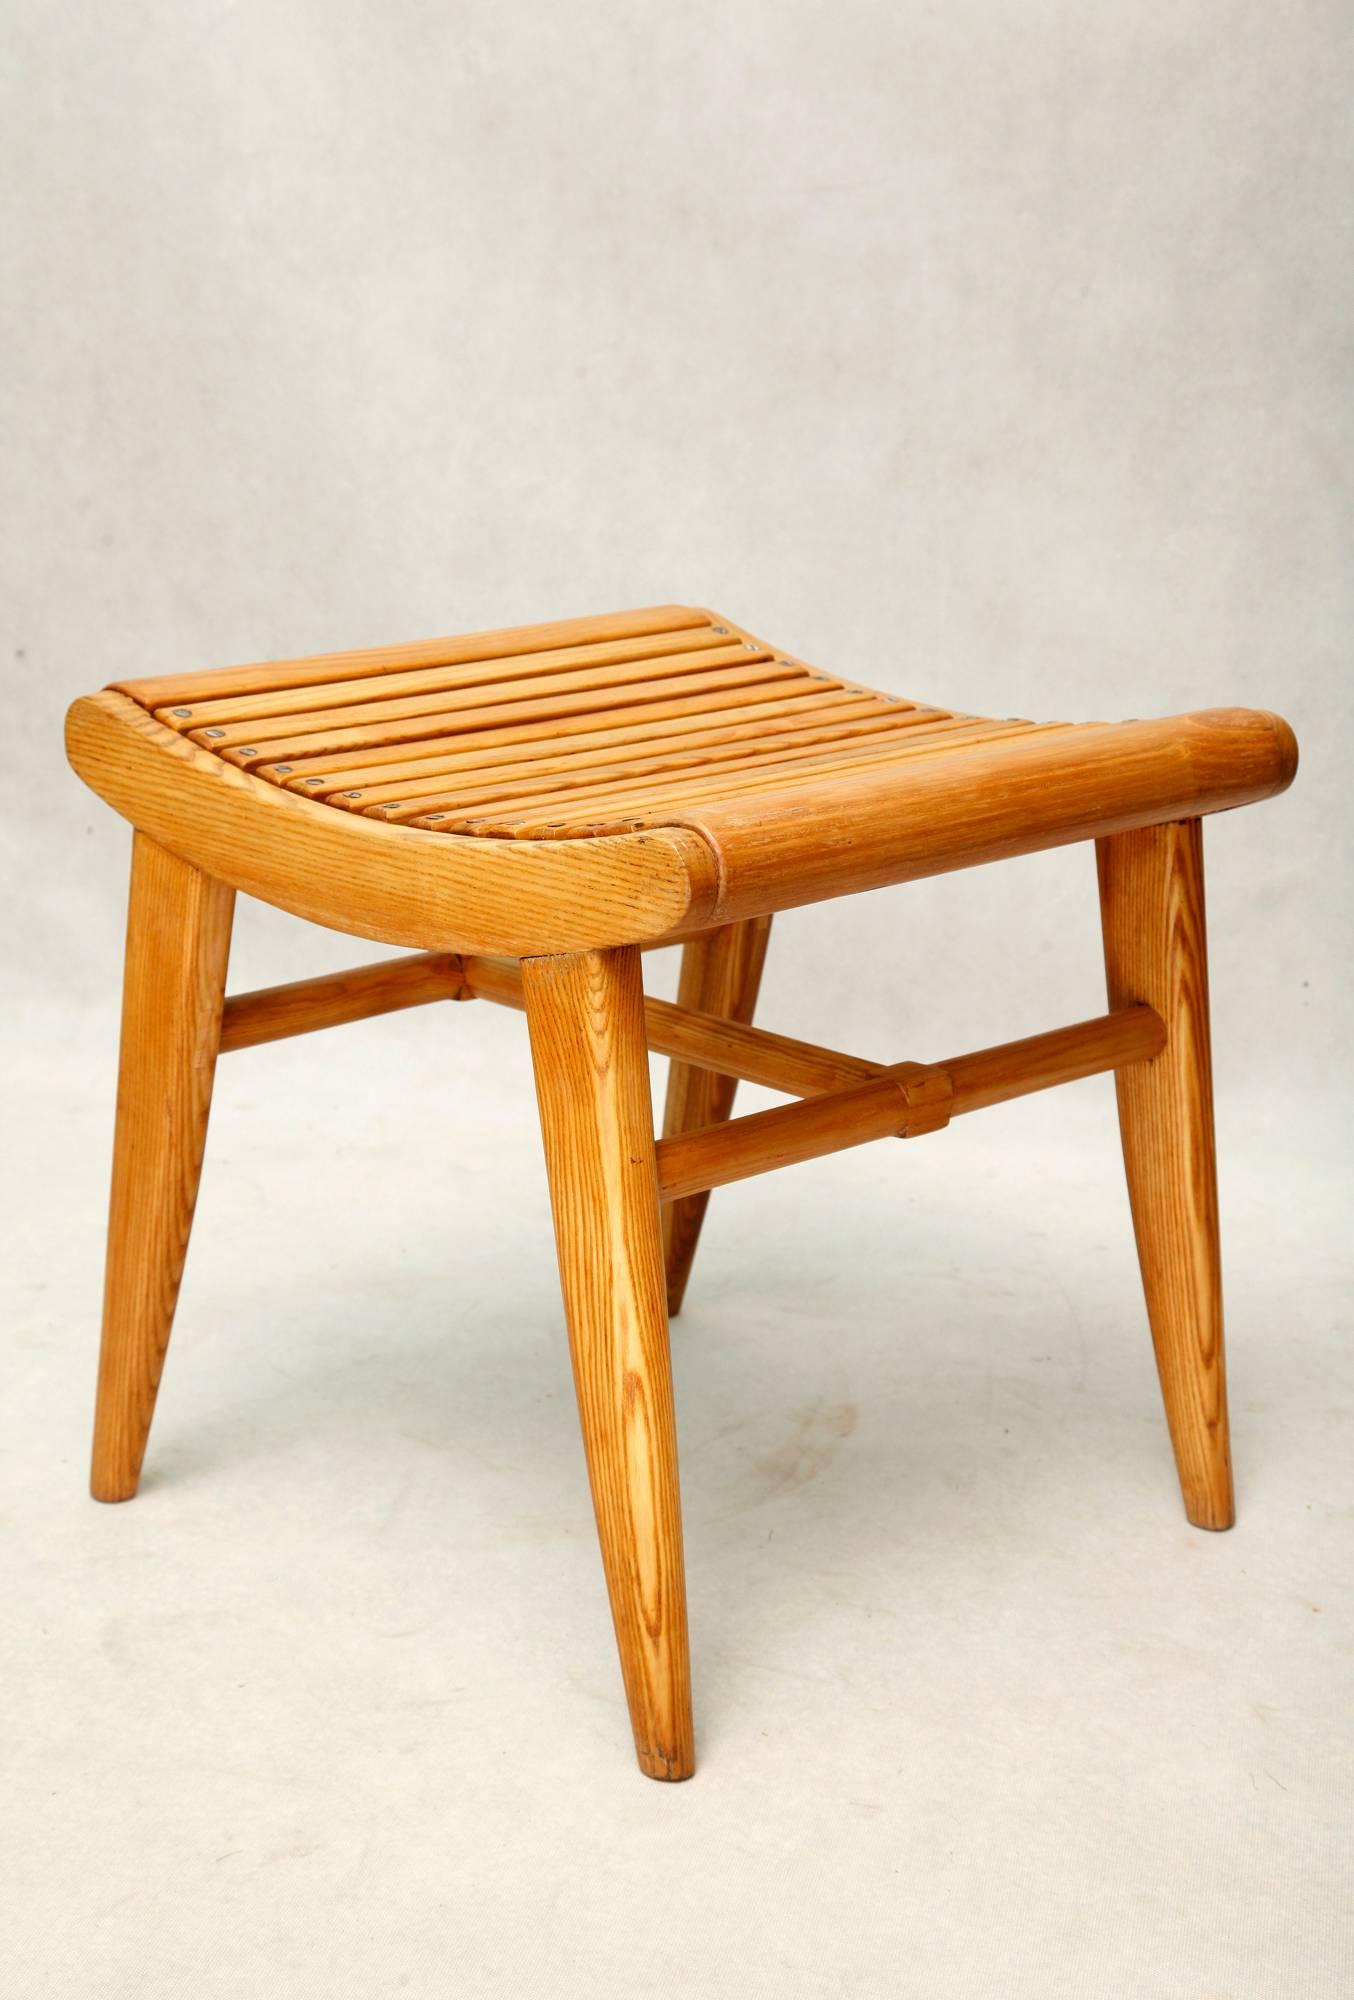 Made to order in the 1950s, a stool made of ash wood, 100% wood. The project was made for the needs of polish wedding palaces, where it was used during a civil marriage ceremony. The Young Couple sat on them while they were getting married.
Made a